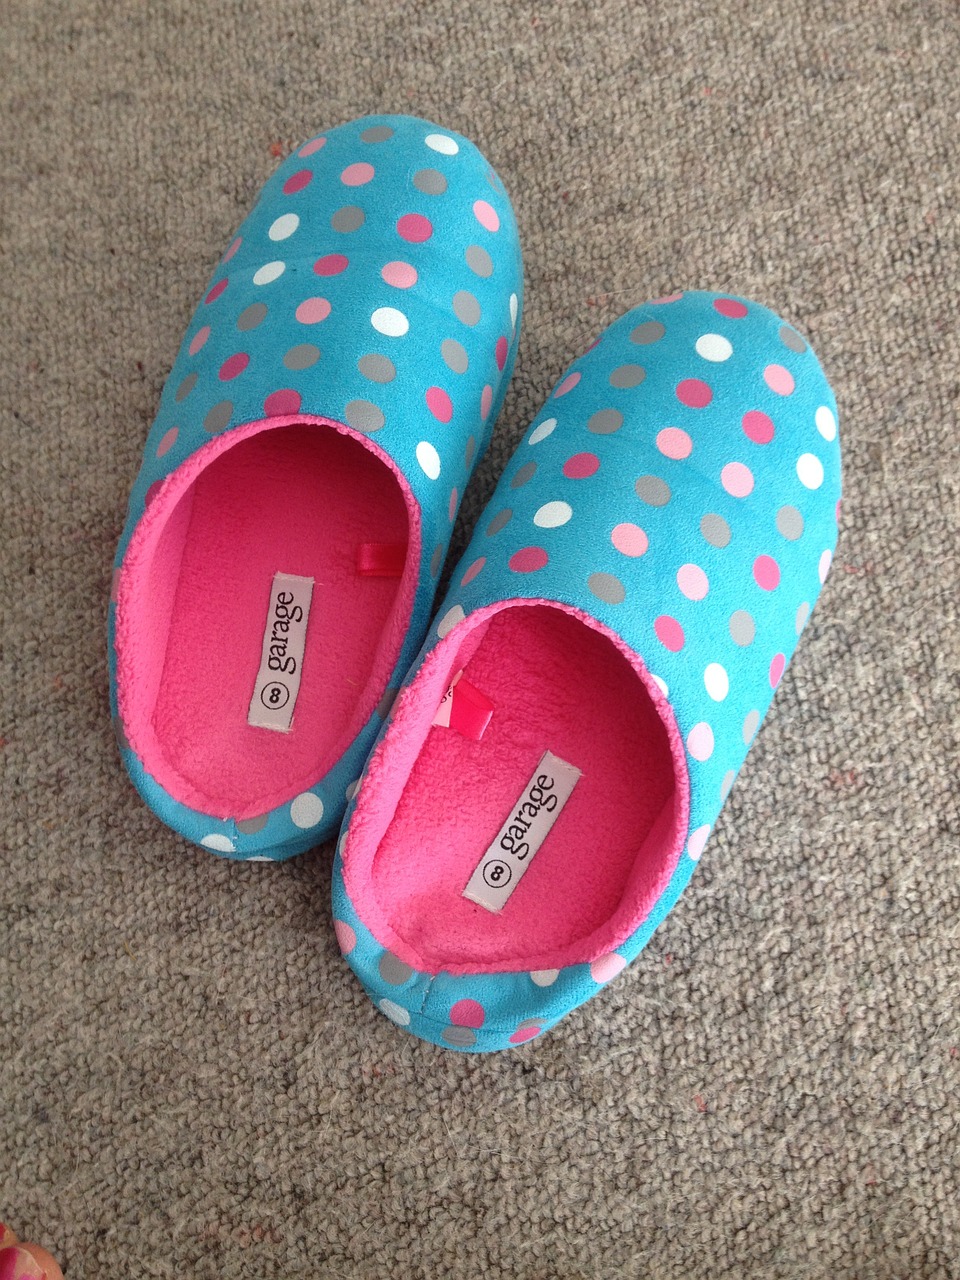 slippers shoes pair free photo